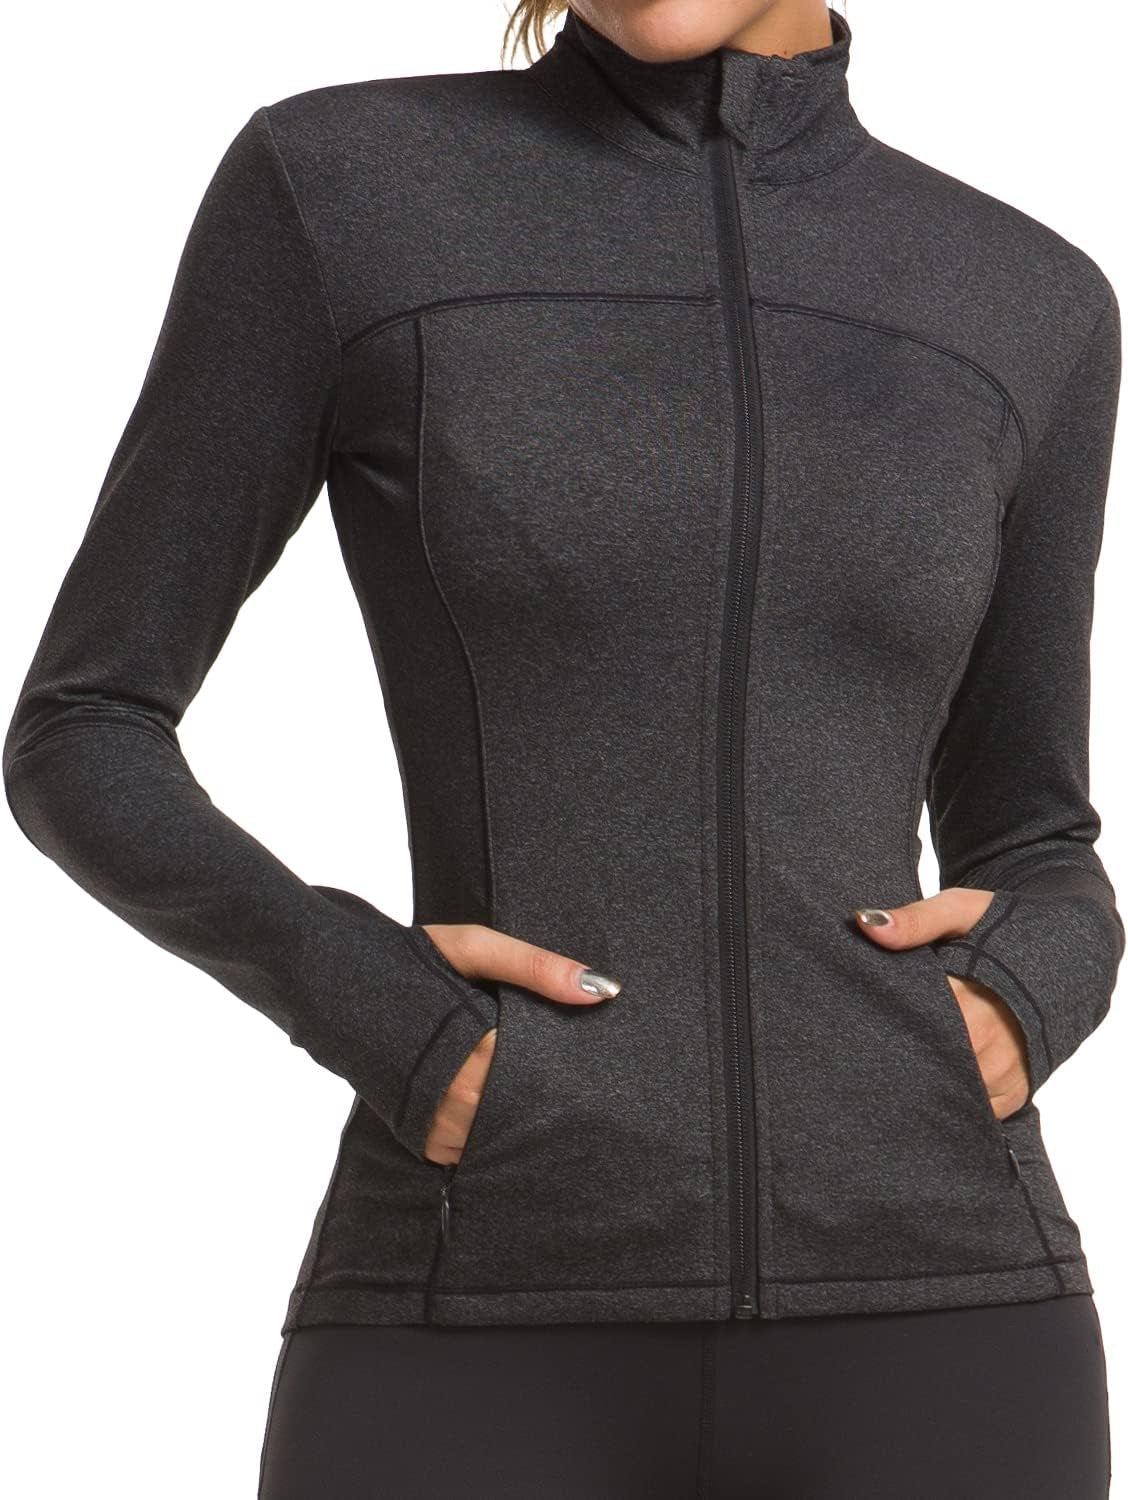 "Stay Fit and Fashionable with our Stylish and Colorful Women's Workout Jacket - The Perfect Lightweight and Slim Fit Track Jacket with Pockets and Full Zip Design!"